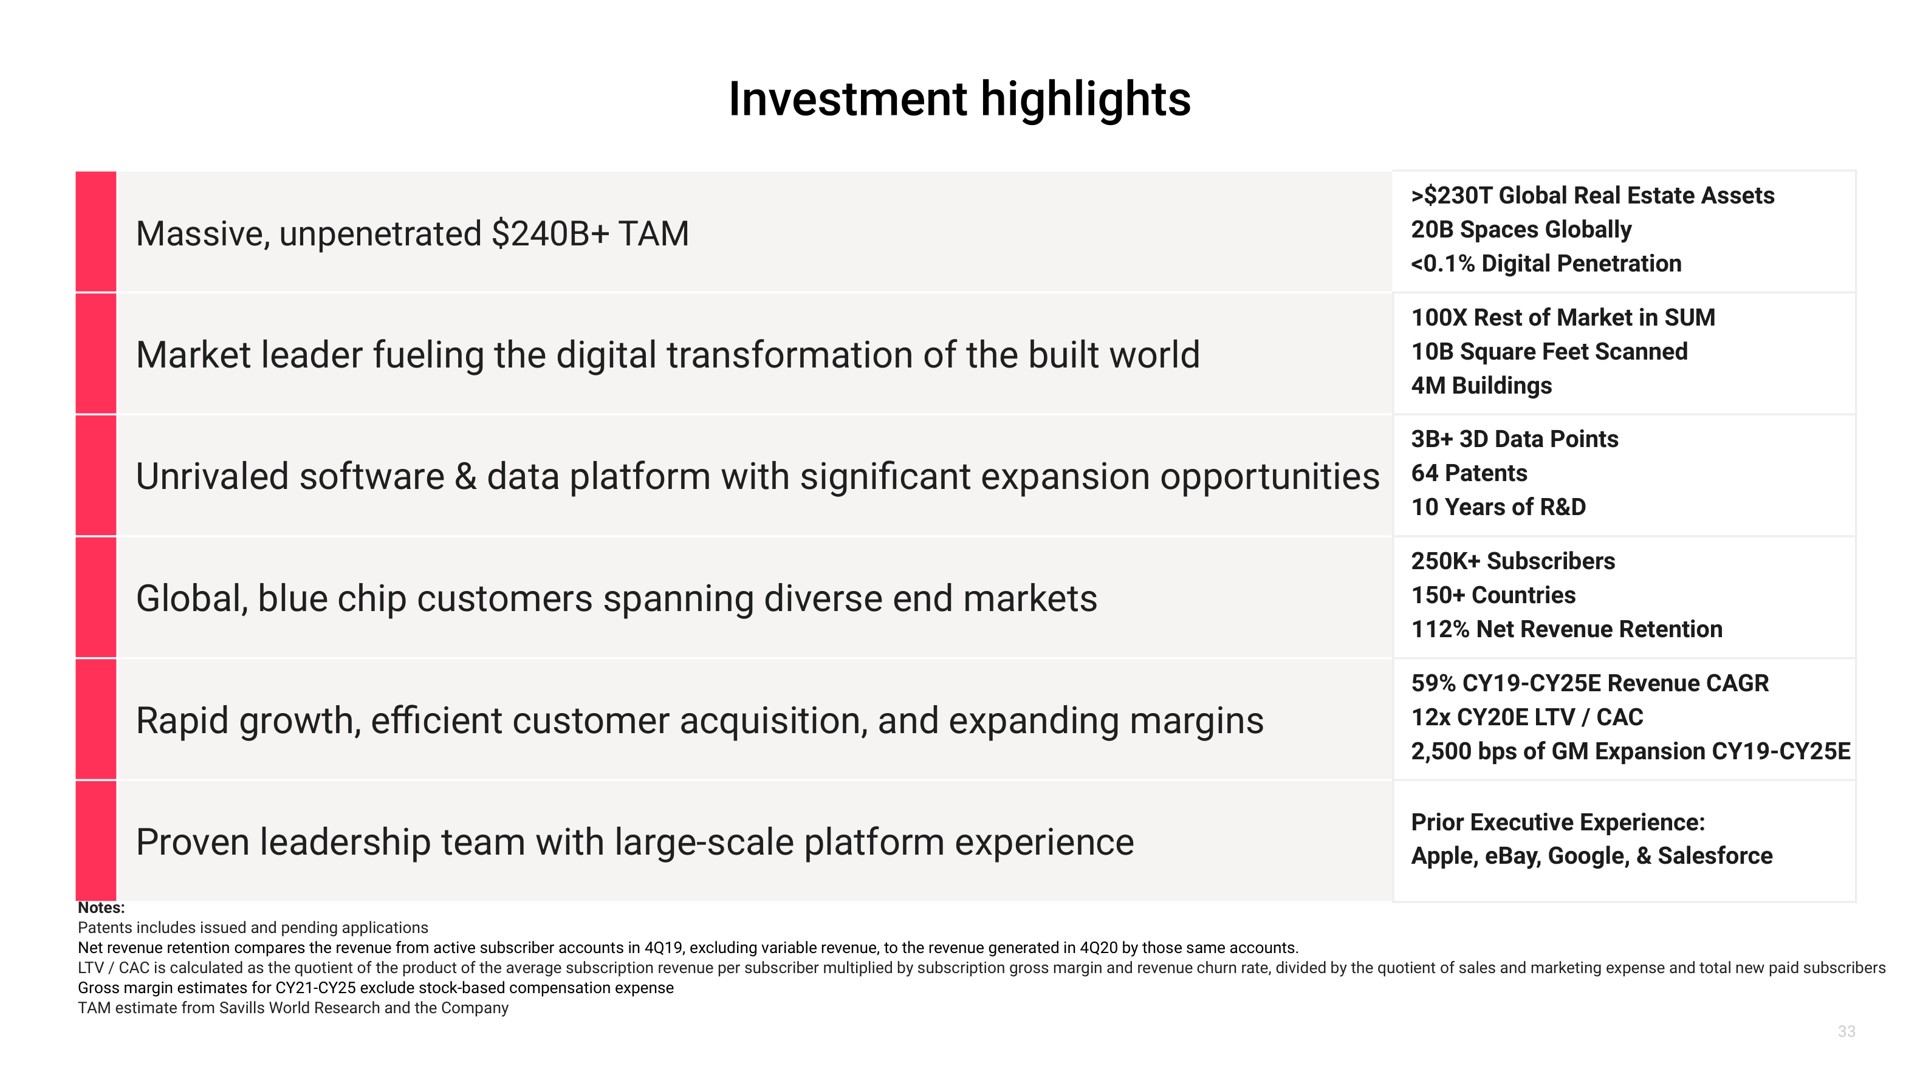 massive unpenetrated tam market leader fueling the digital transformation of the built world unrivaled data platform with cant expansion opportunities global blue chip customers spanning diverse end markets rapid growth customer acquisition and expanding margins proven leadership team with large scale platform experience investment highlights | Matterport